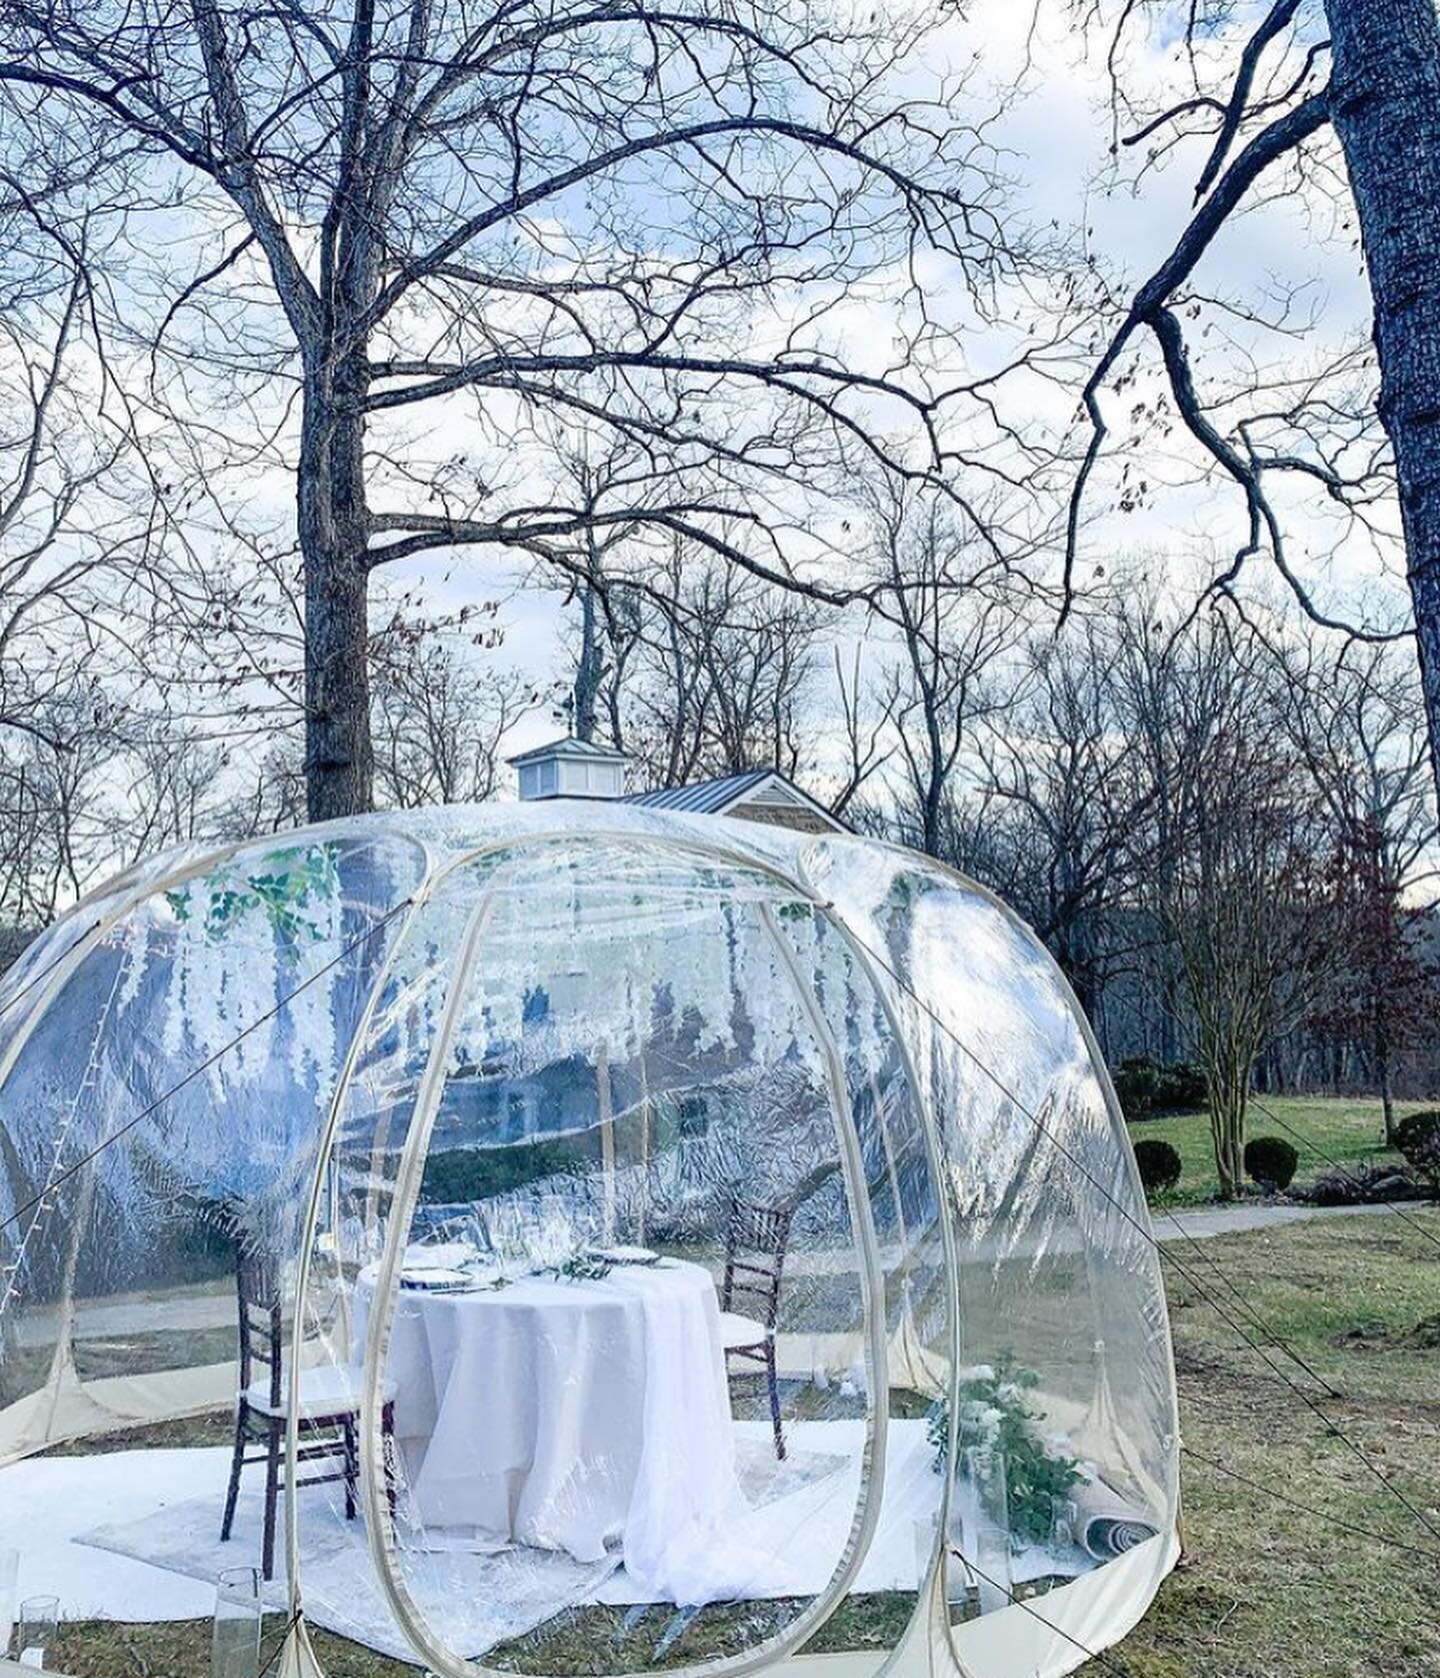 Rent our Igloo for your elopement or special birthday dinner. Our Igloo is XXL, fits up to 15 ppl comfortably so you can literally set it up for an intimate post-elopement cozy dinner, have your #elopement ceremony in it! Email us for details or avai